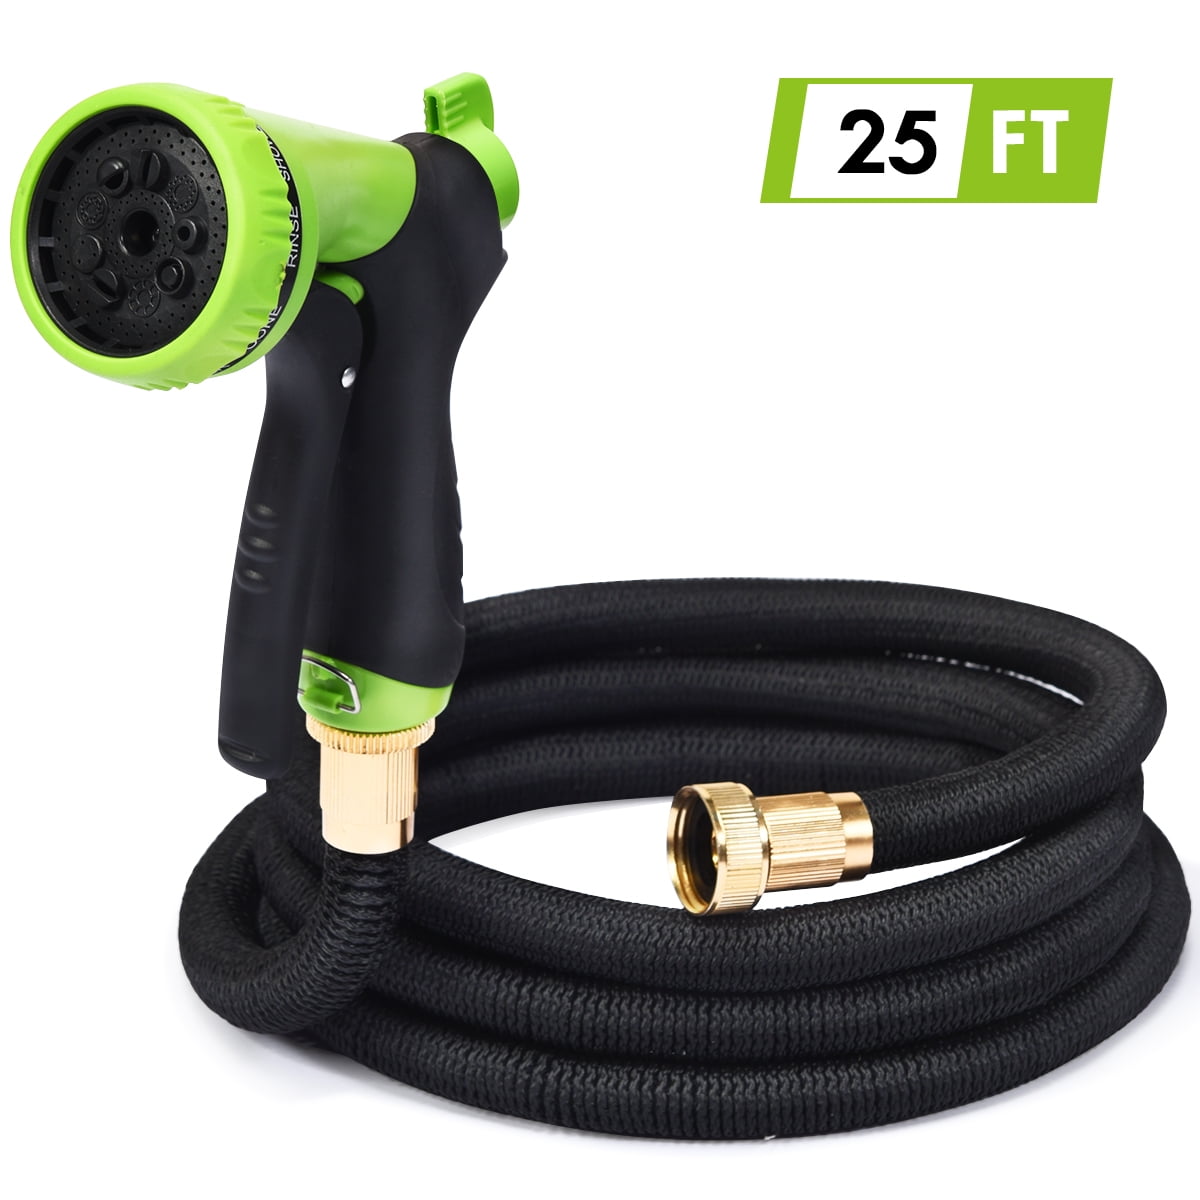 5 in 1 Deluxe 25 75 Ft Expandable Flexible Garden Water Hose Holder Spray Nozzle 